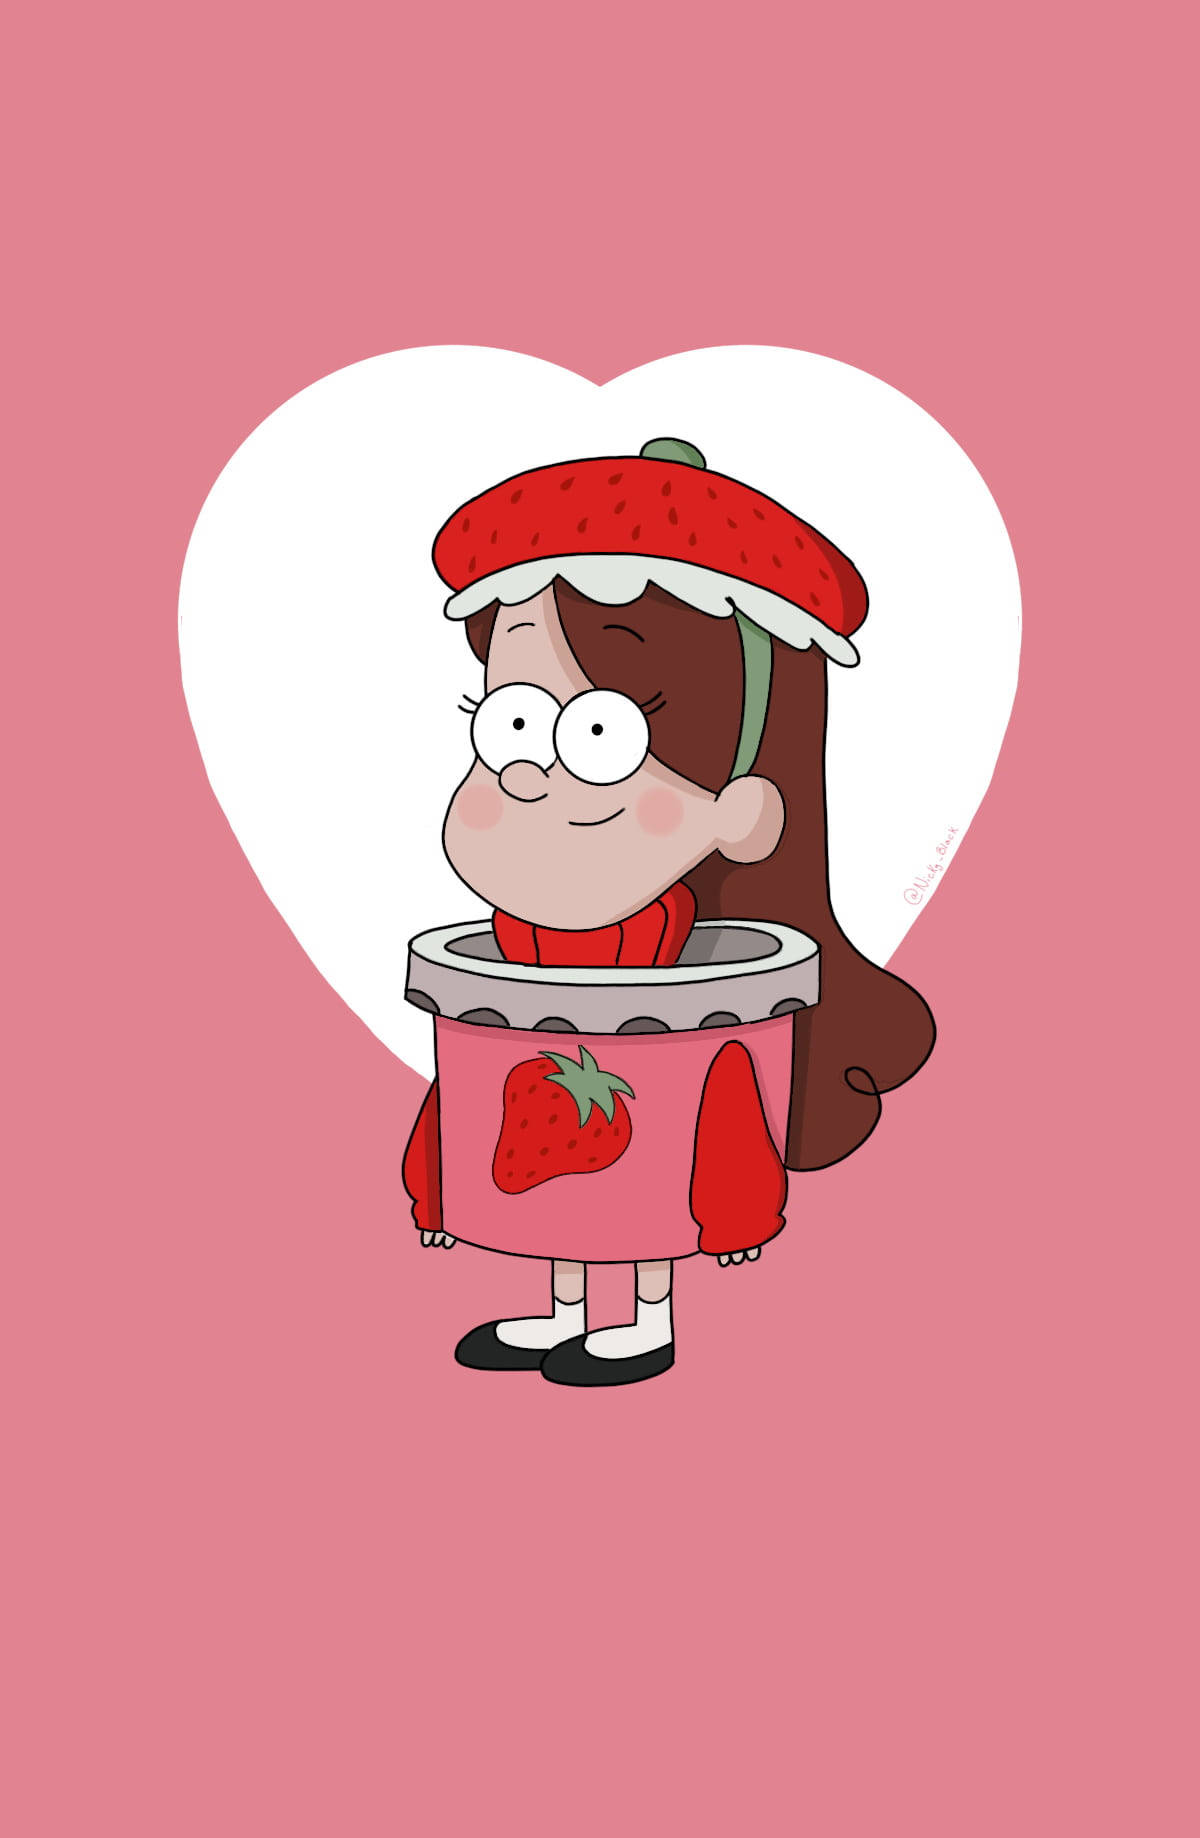 Strawberry Heart Mabel Pines Background